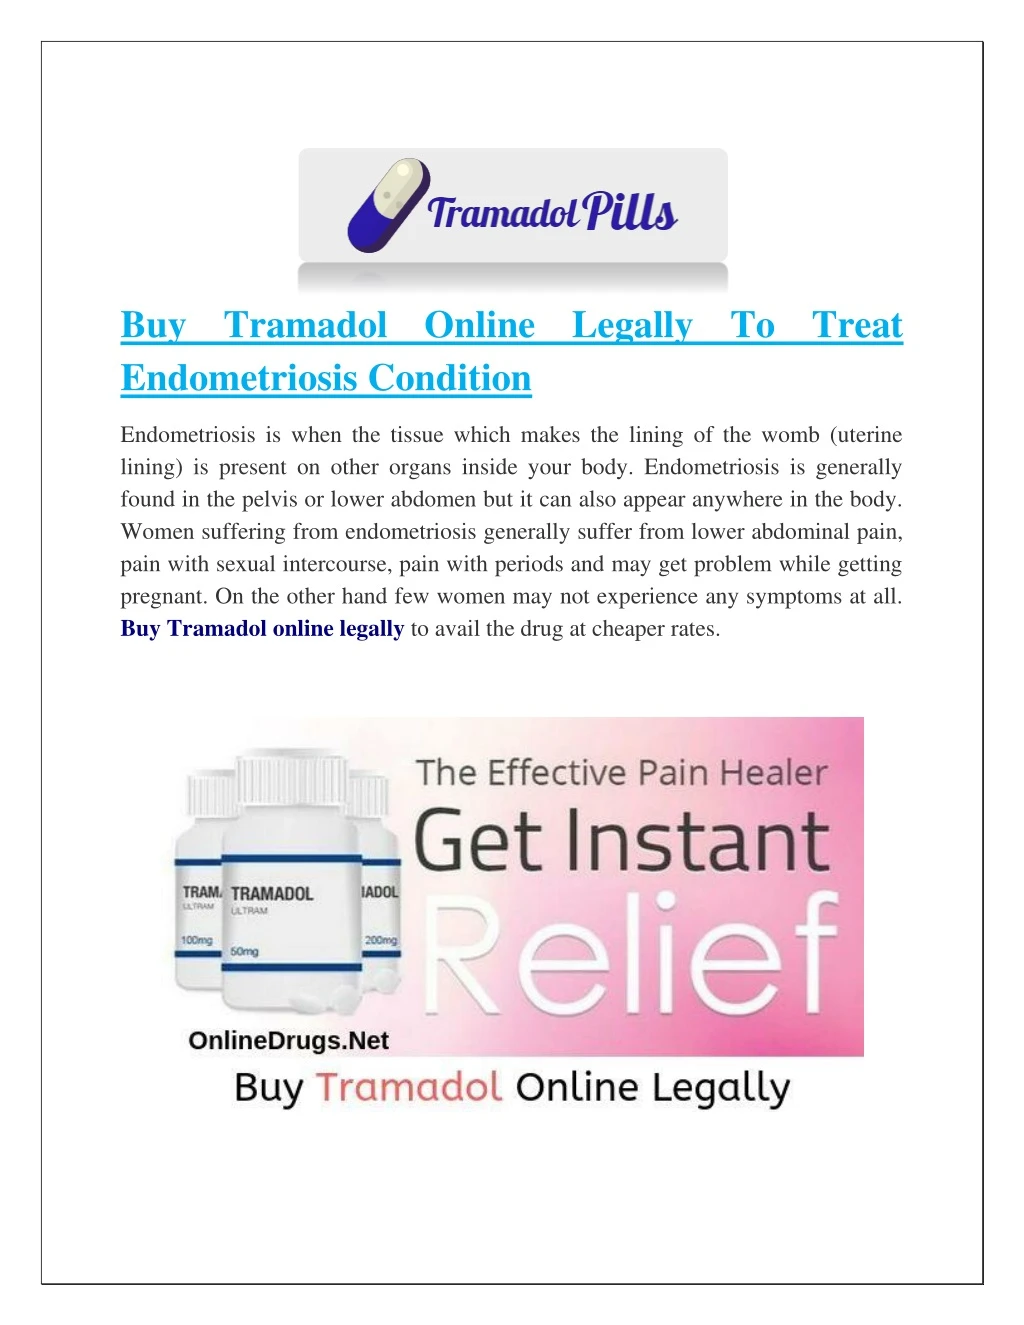 buy tramadol online legally to treat